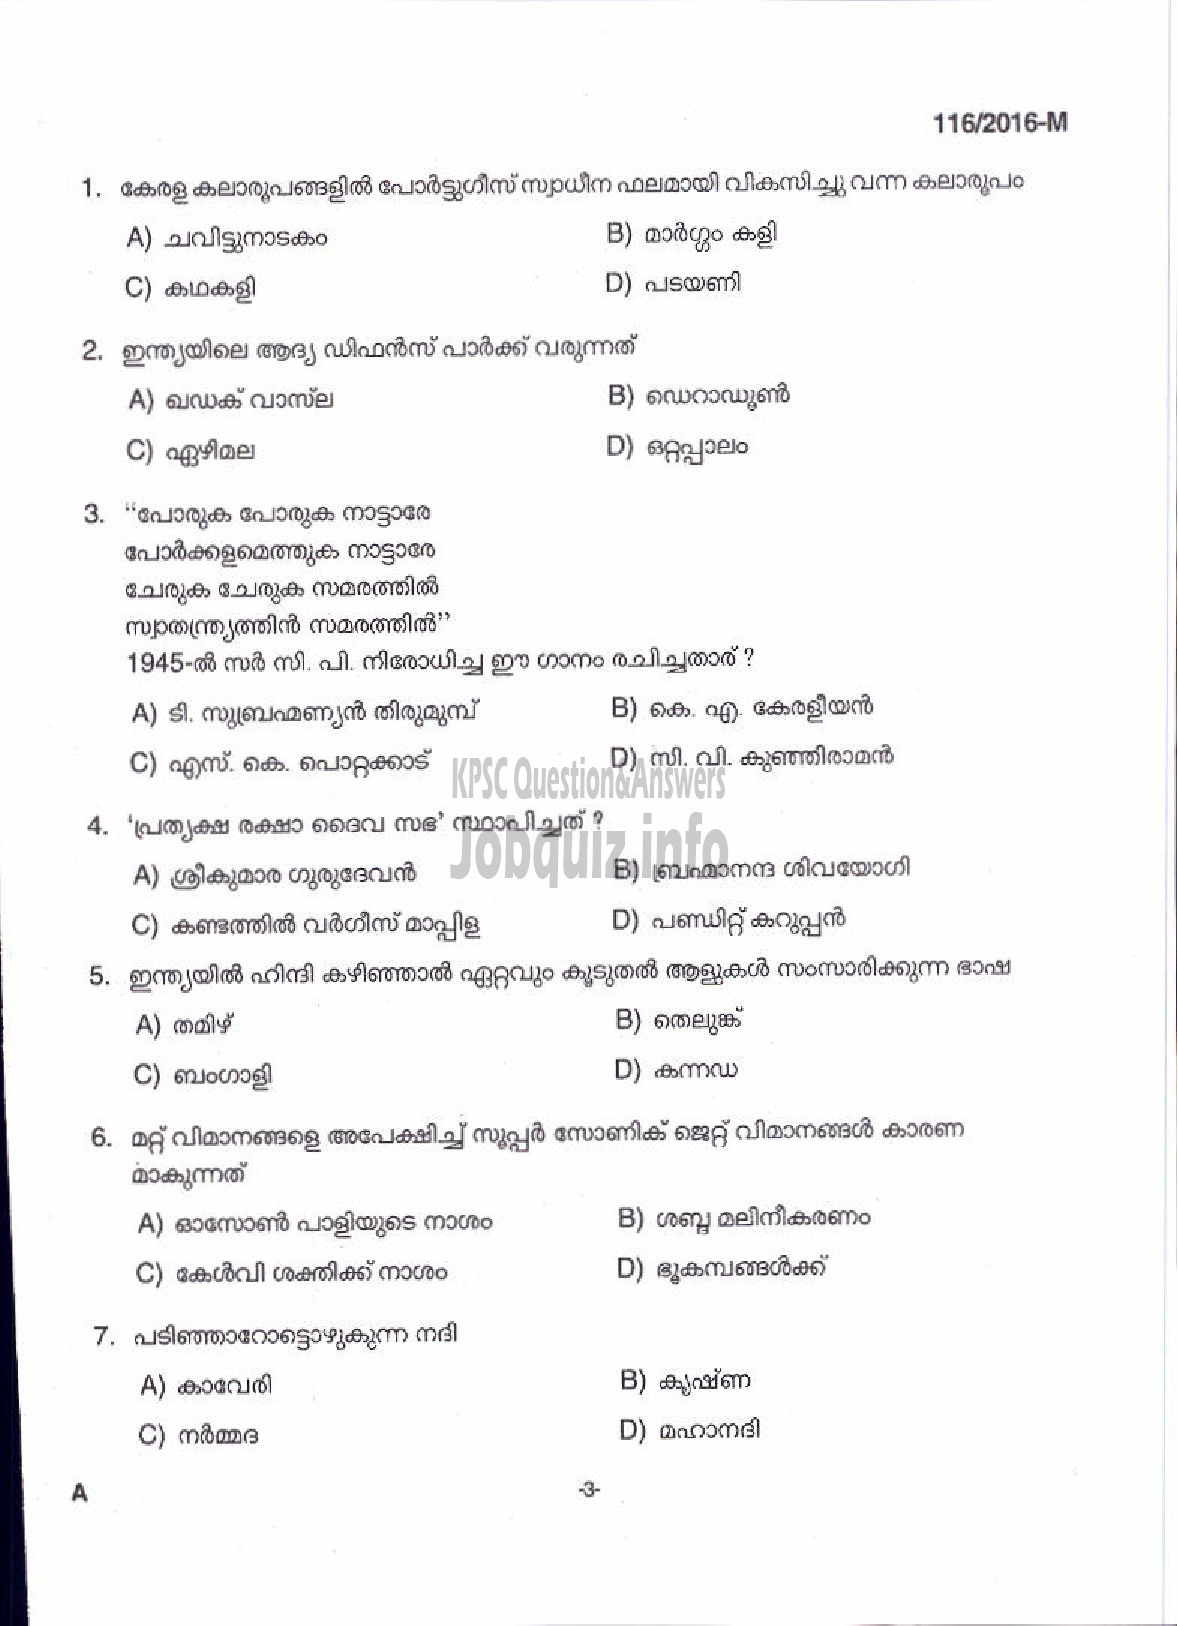 Kerala PSC Question Paper - LGS APEX SOCIETIES OF CO OPERATIVE SECTOR IN KERALA DIRECT/ SOCIETY-1